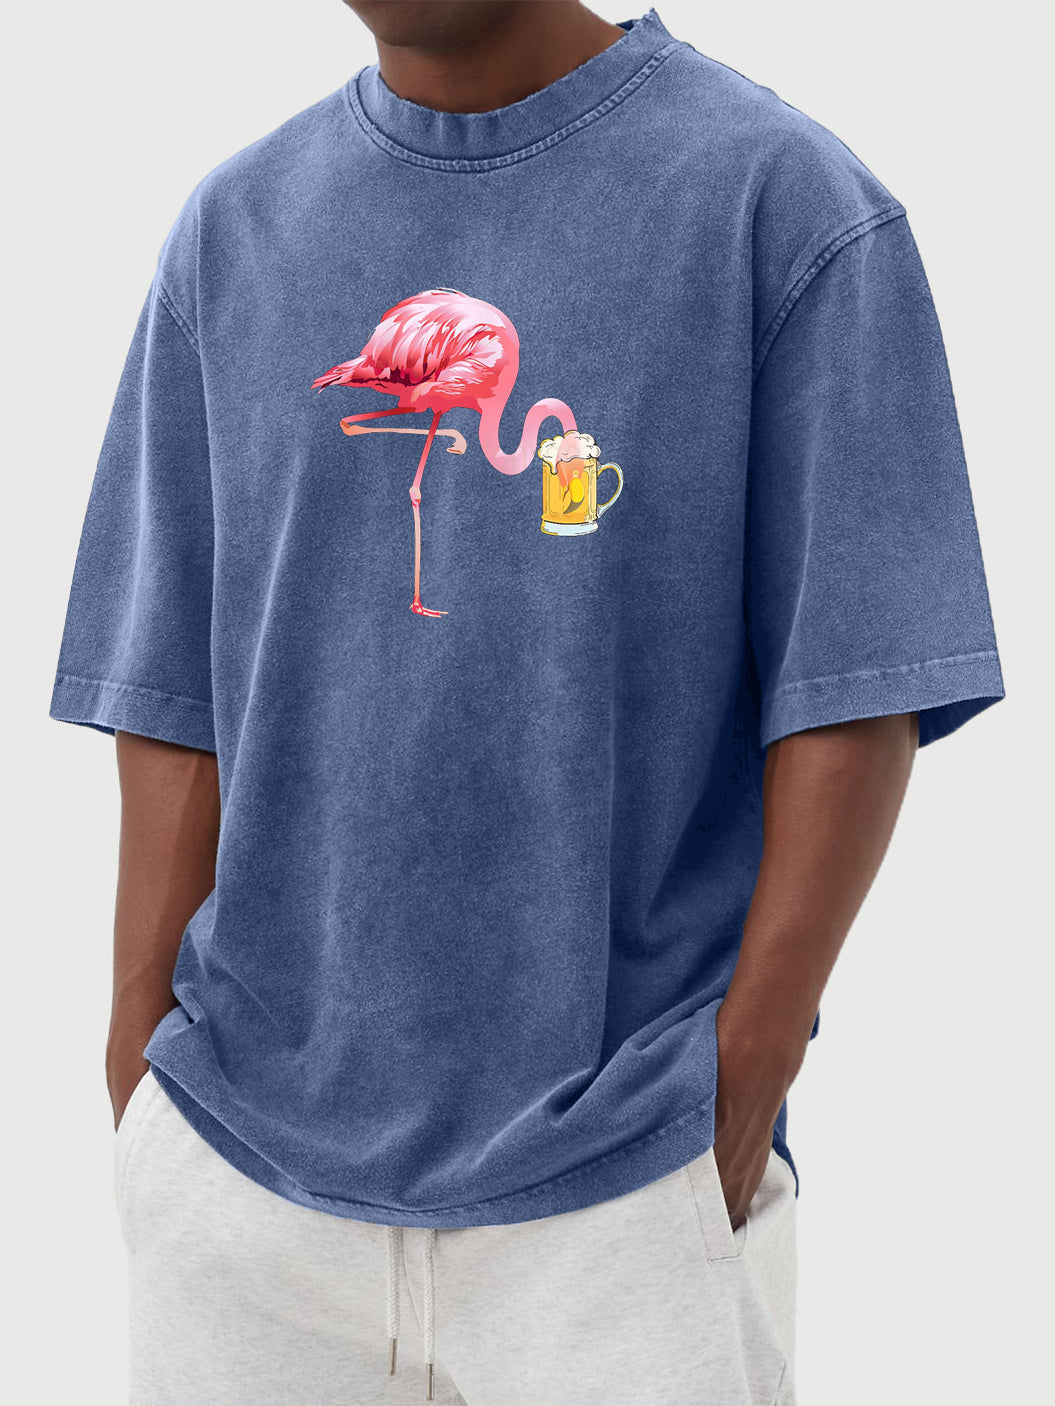 Men's Flamingo Beer Print Washed Distressed Cotton T-Shirt Top